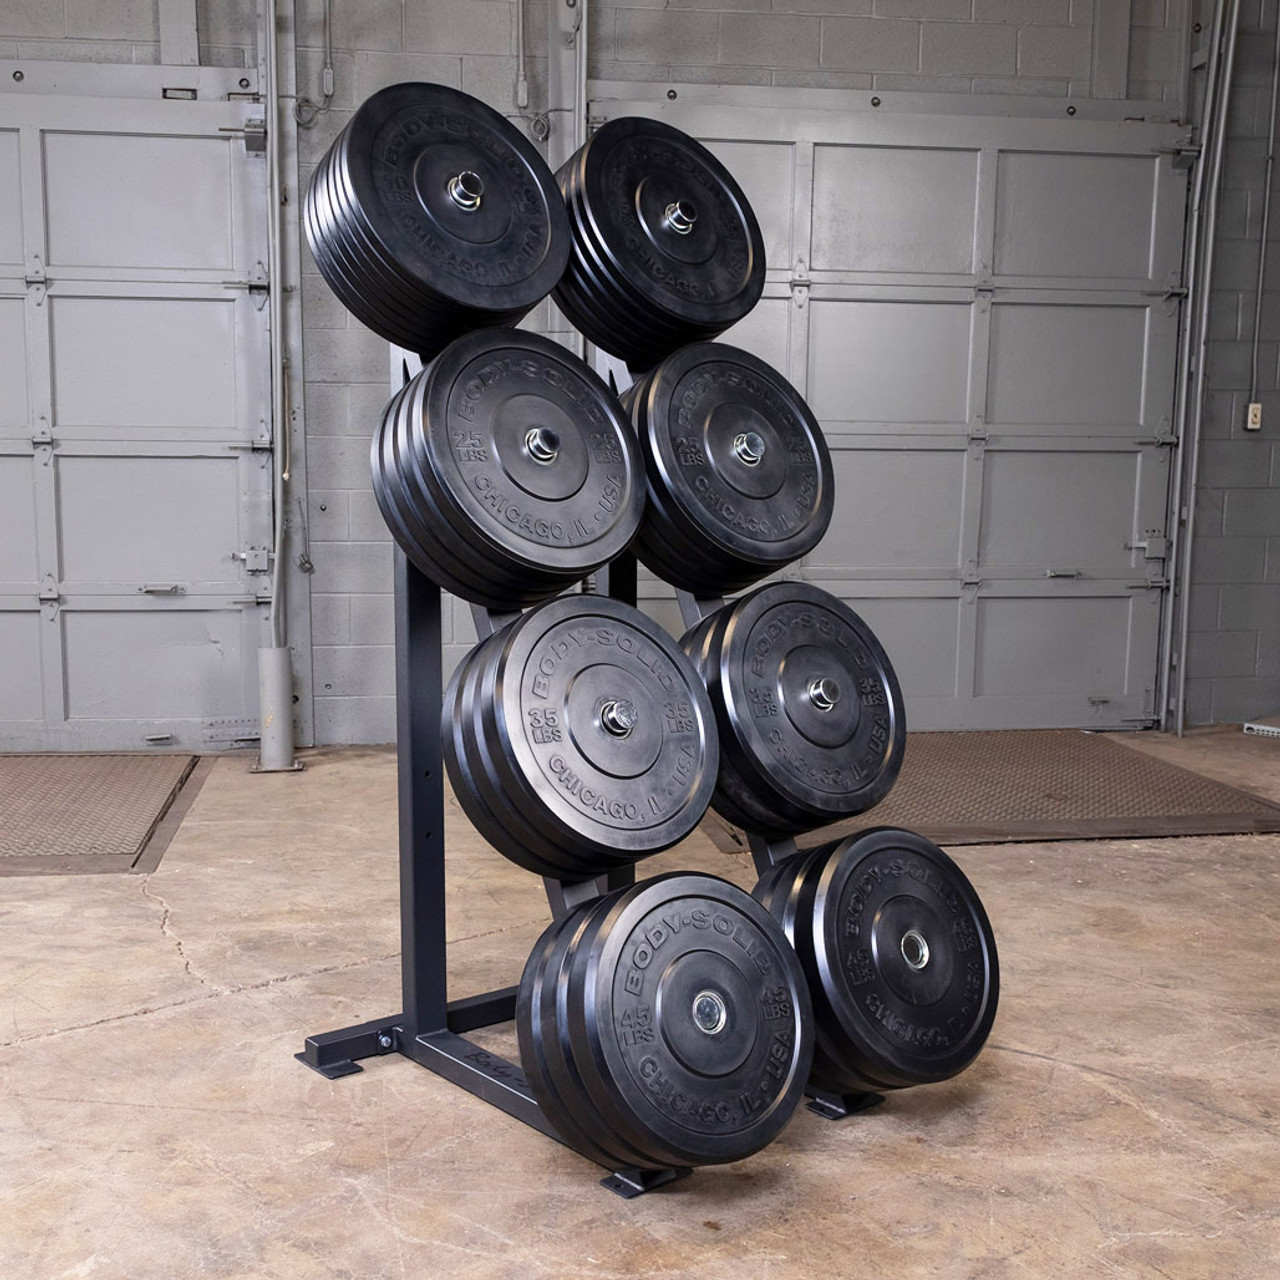 Body-Solid Chicago Extreme Solid Rubber Bumper Plates For Olympic Lifting  (OBPX-BC)